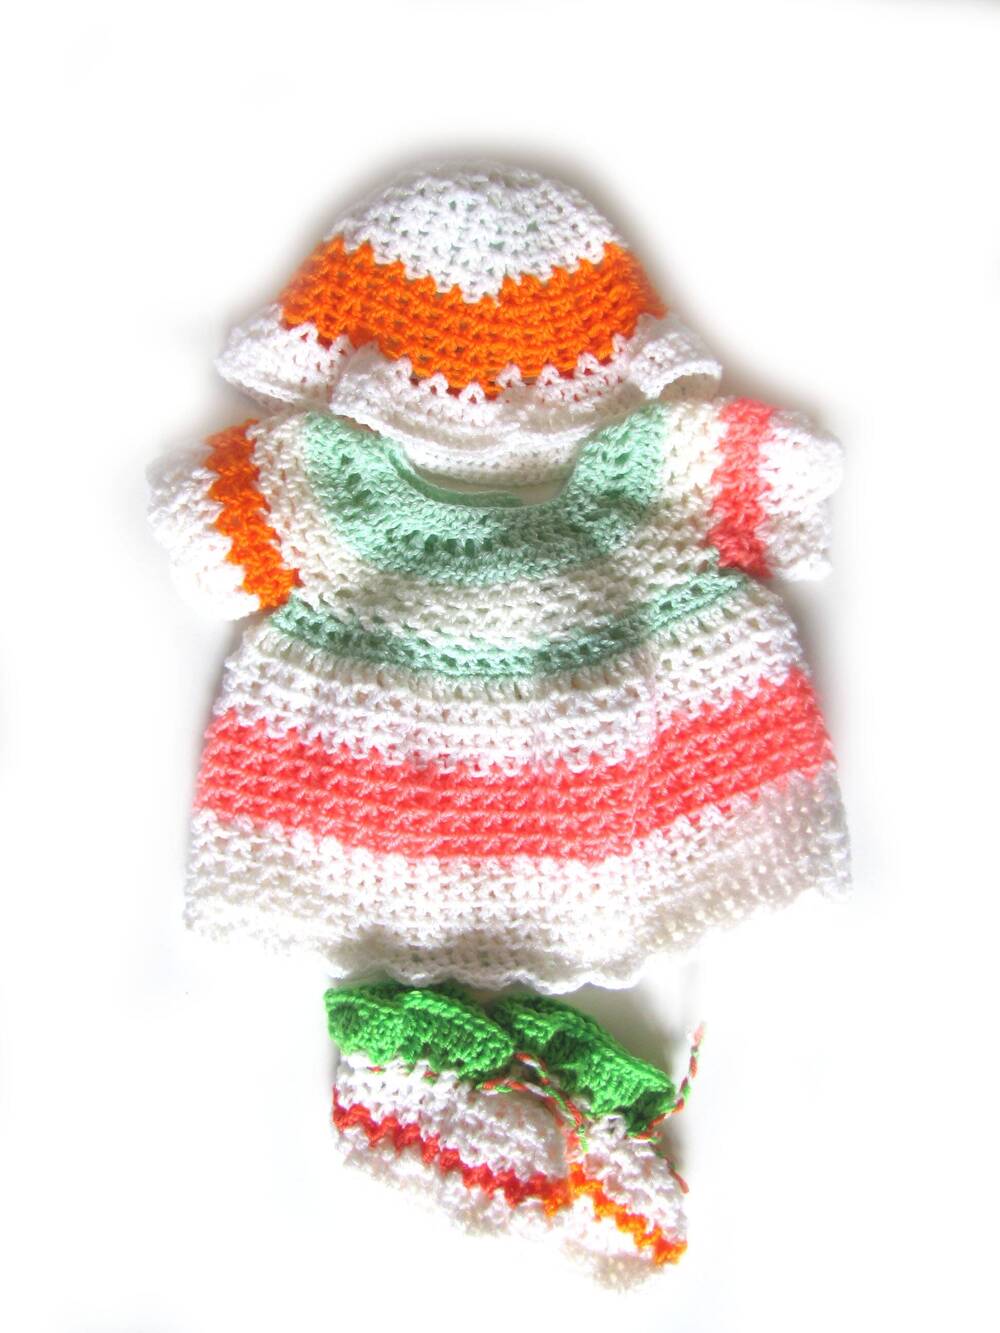 KSS Bright Colored Crocheted Dress, Booties and Hat 6 Months DR-175 KSS-DR-175